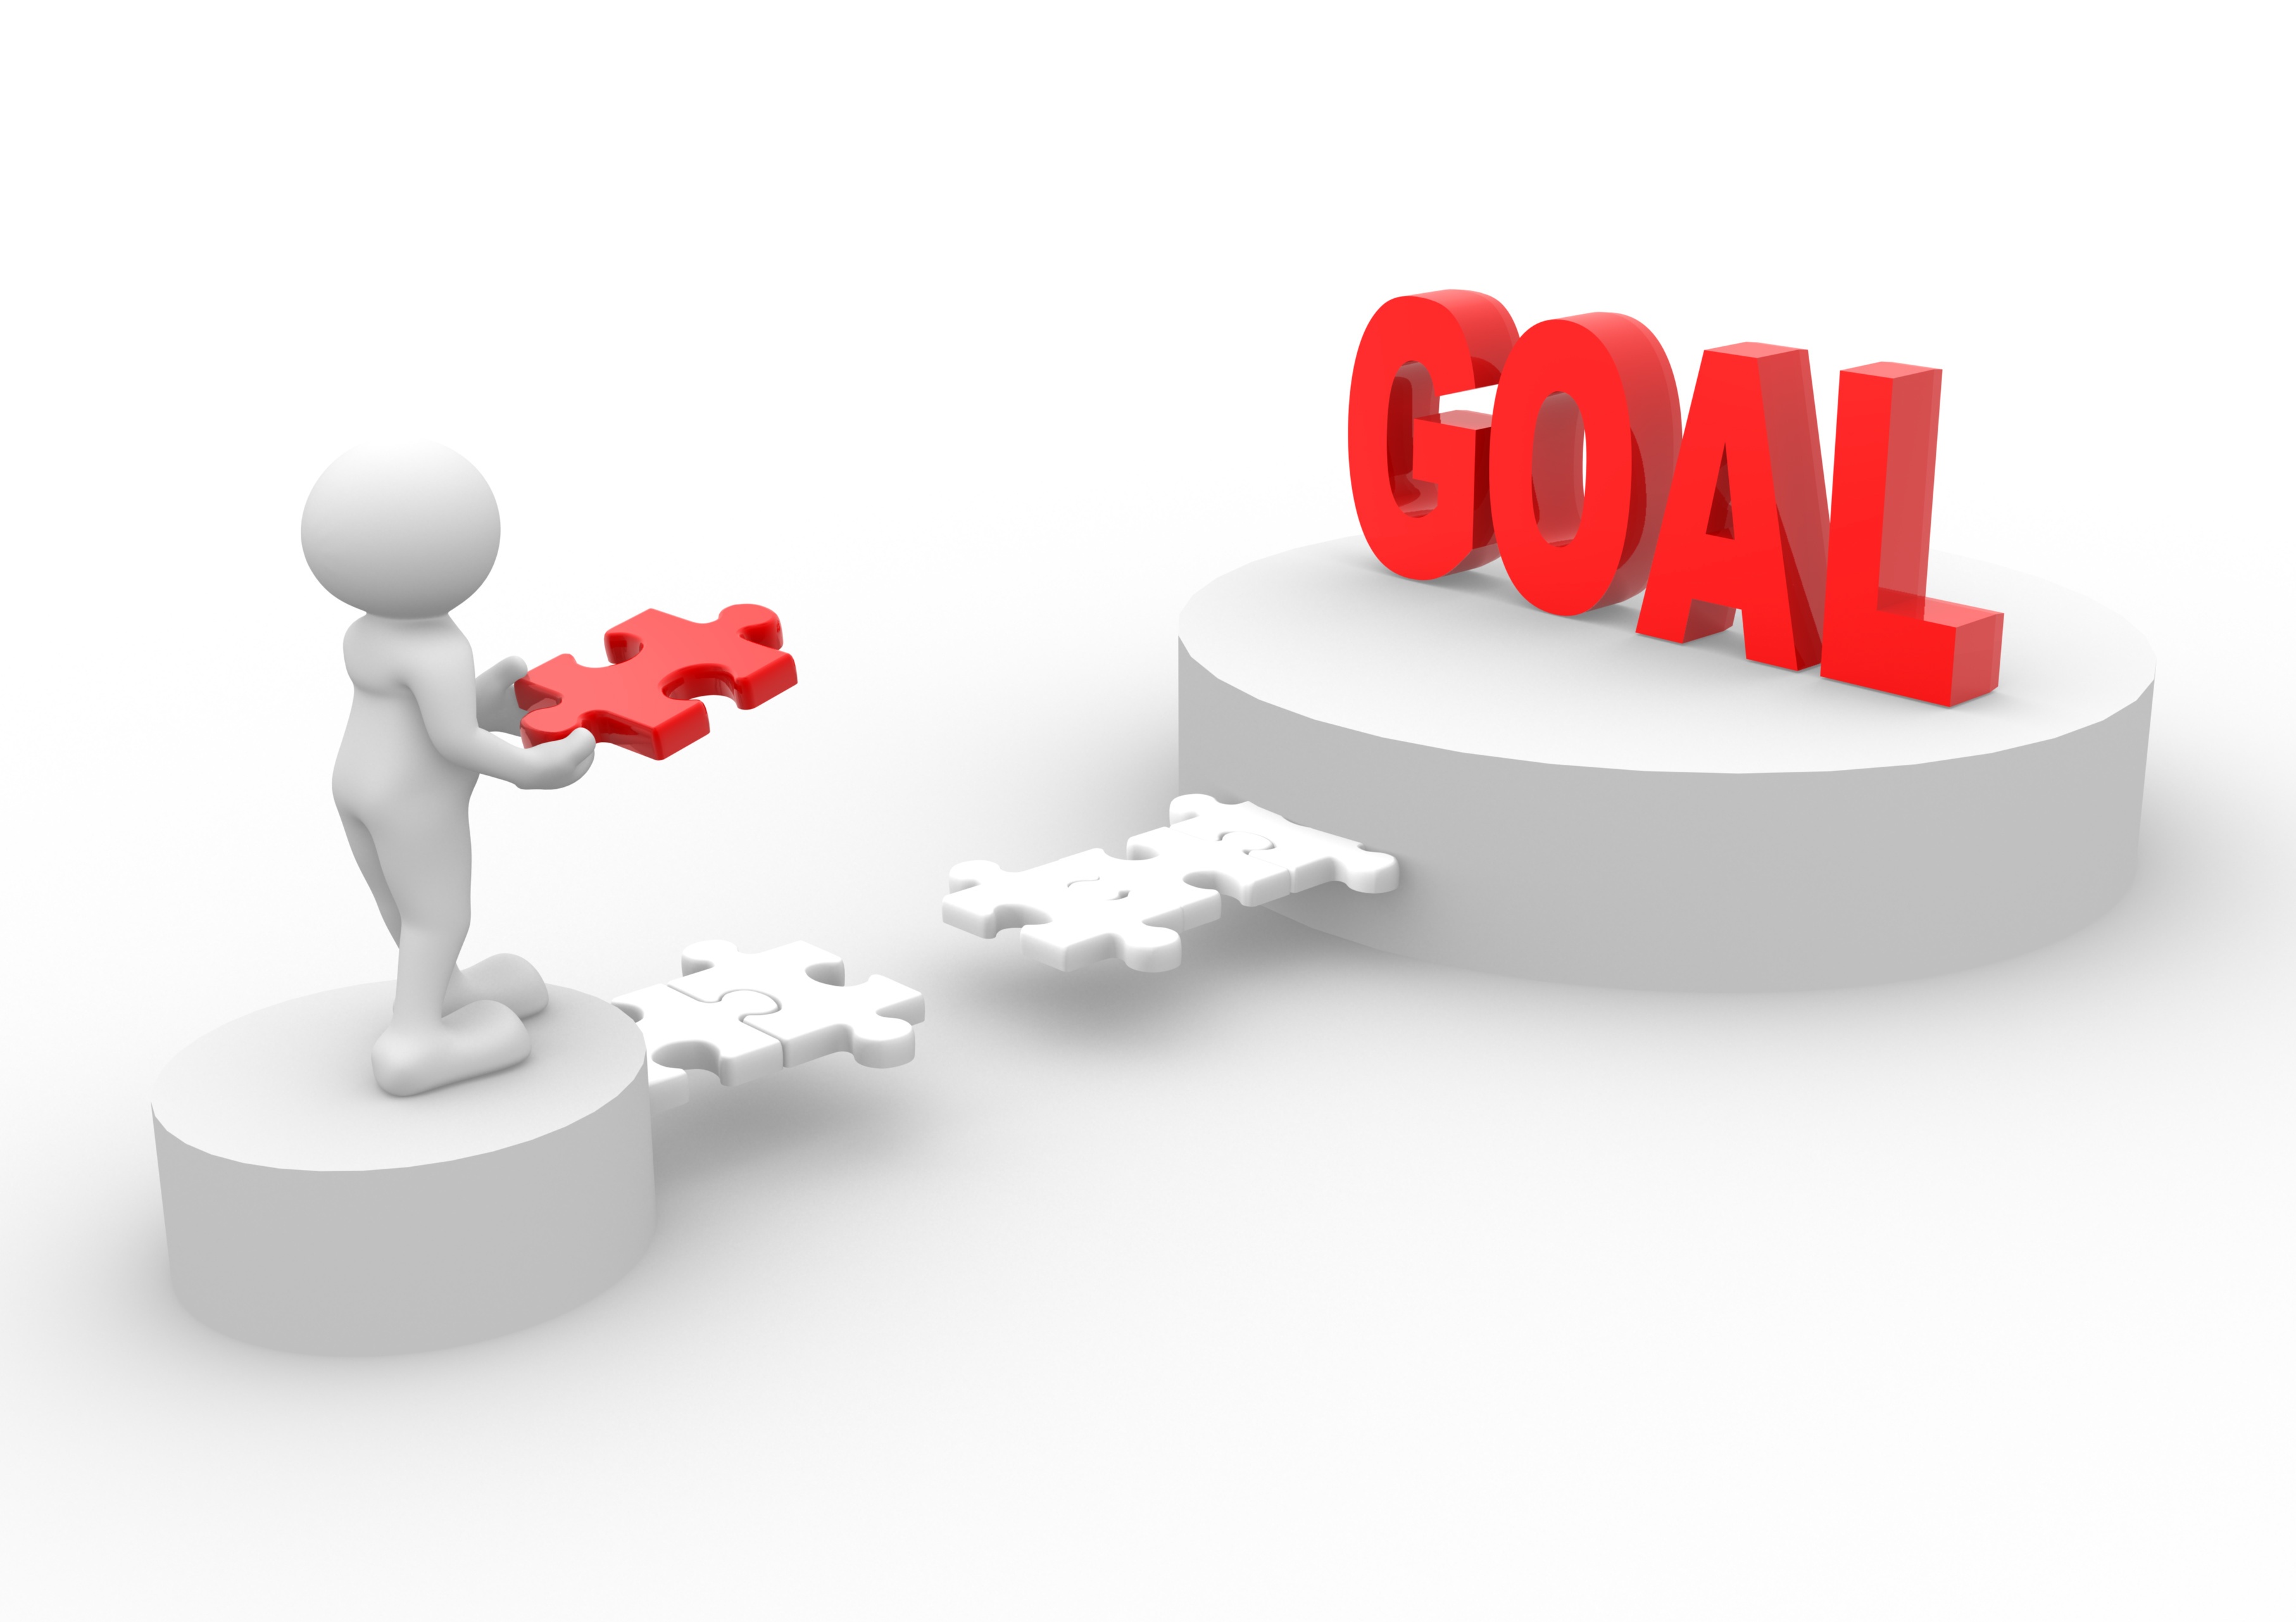 The Difference Between Goal-Setters & Non-Goal-Setters